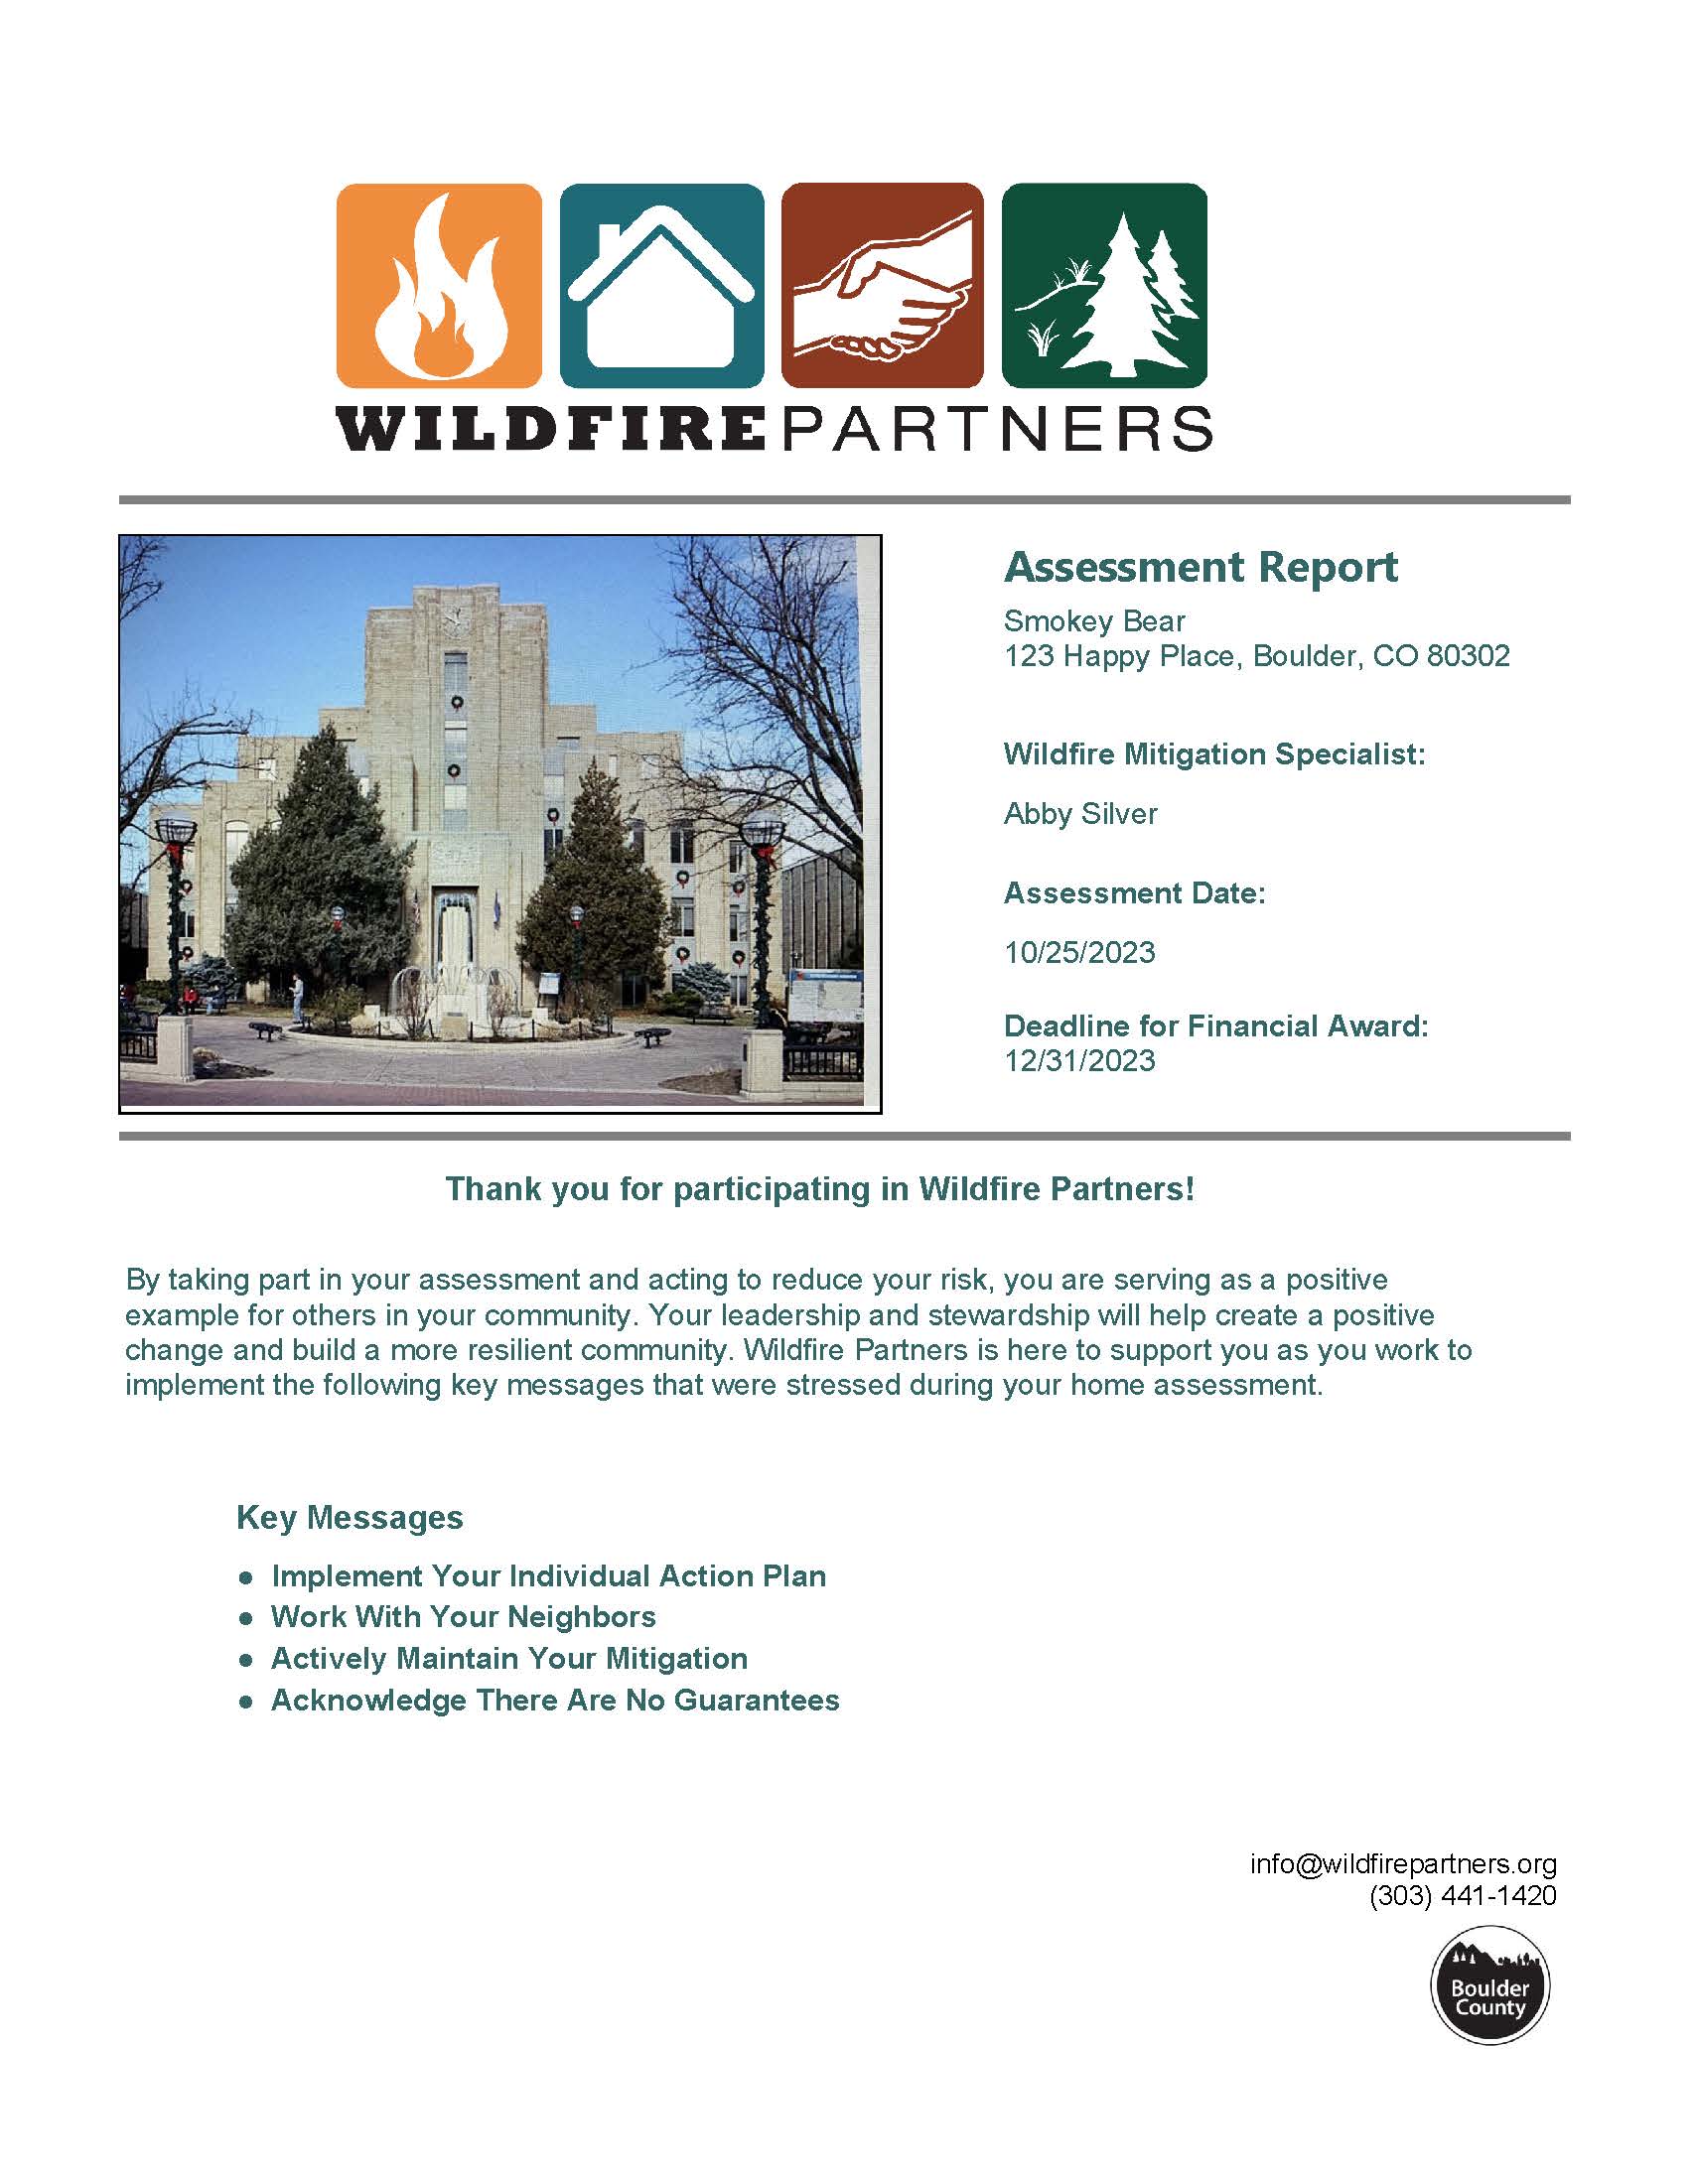 Wildfire Partners assessment report